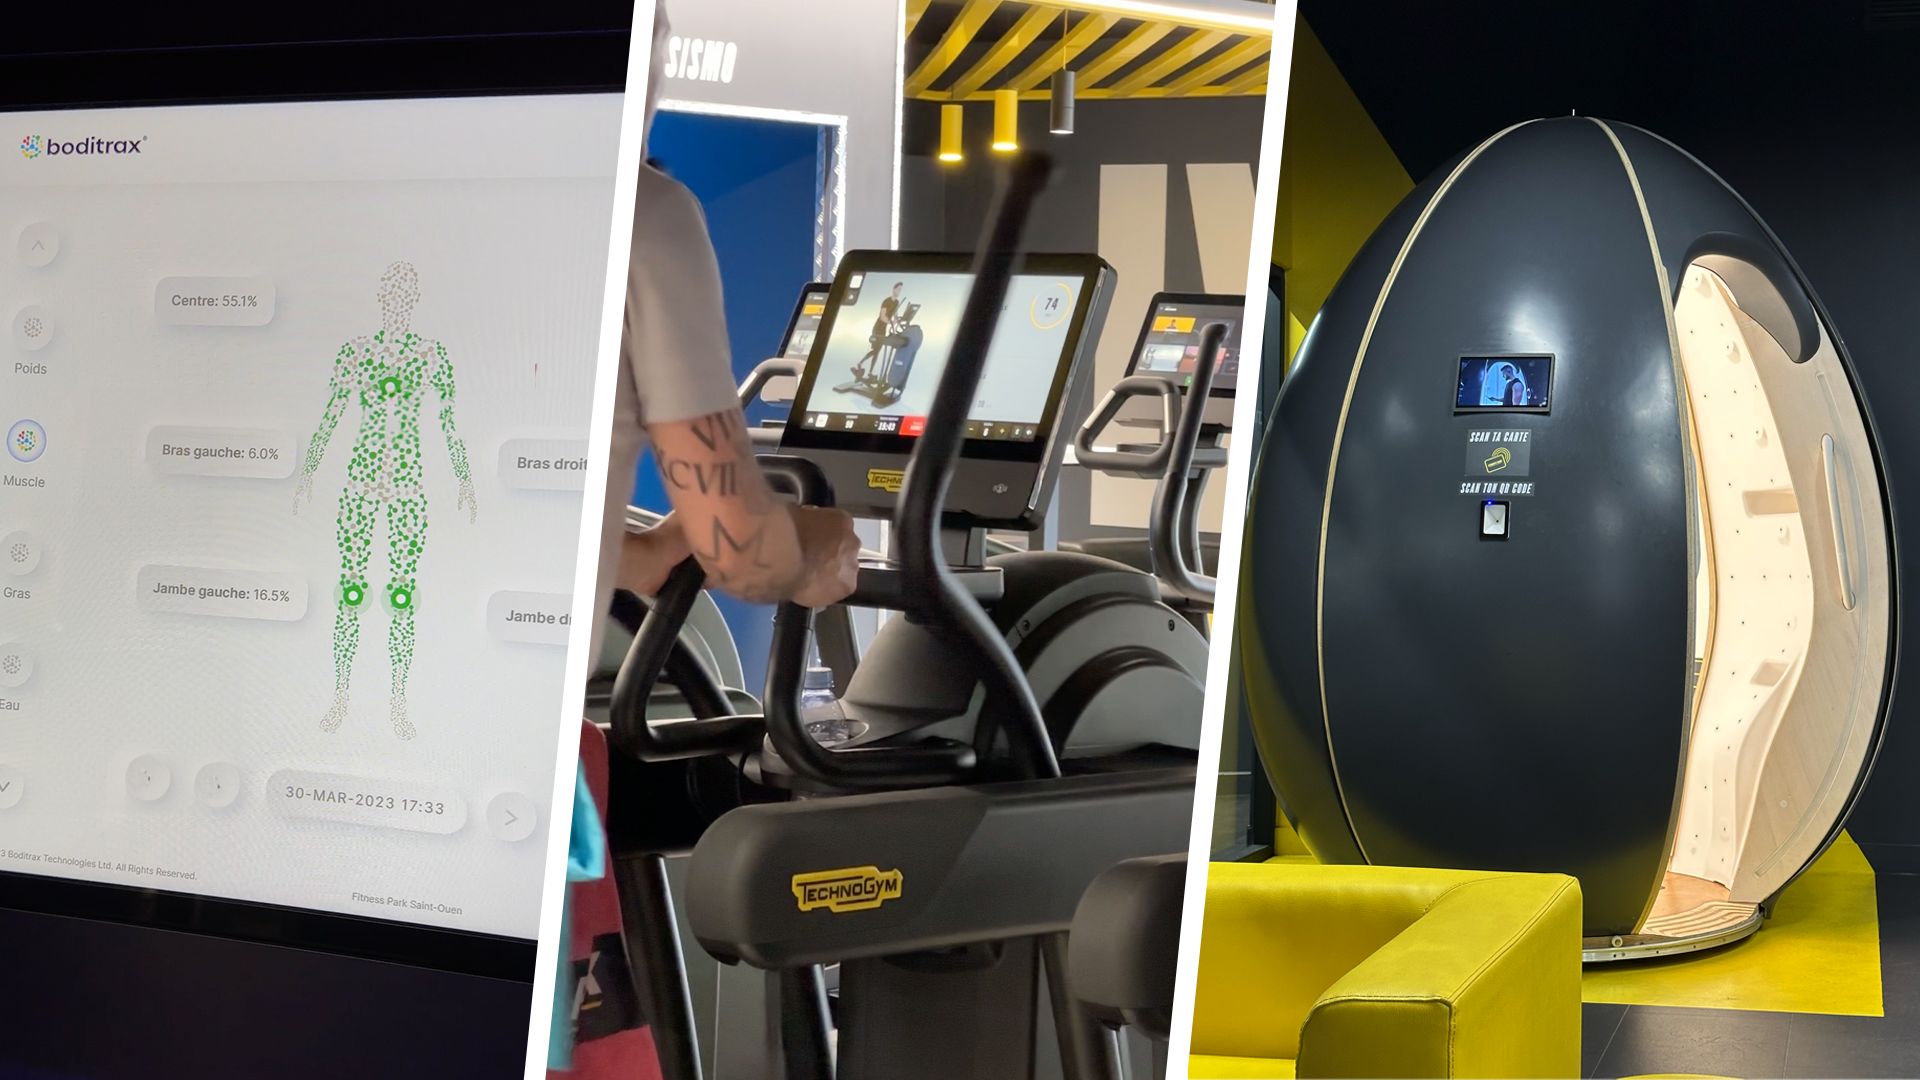 The gyms of the future: how Fitness Park adapts to technology?